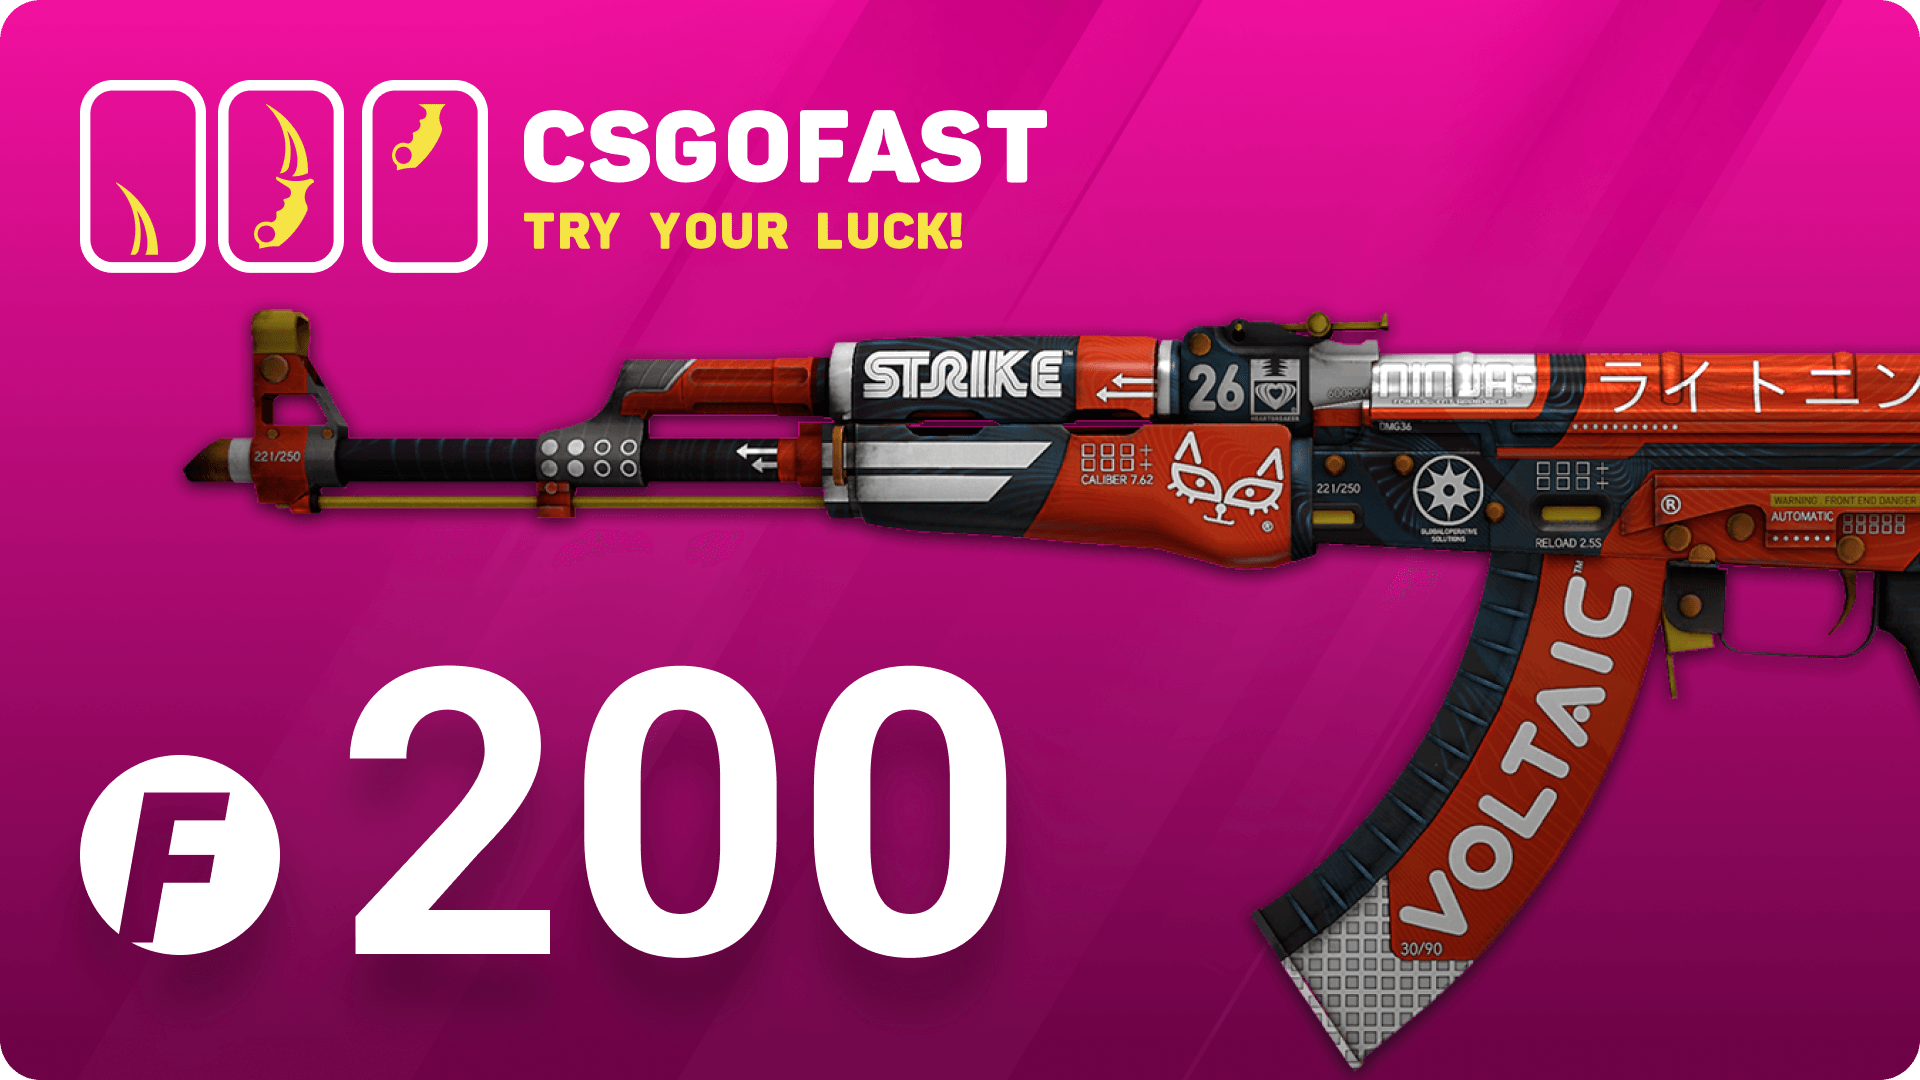 [$ 141.52] CSGOFAST 200 Fast Coins Gift Card